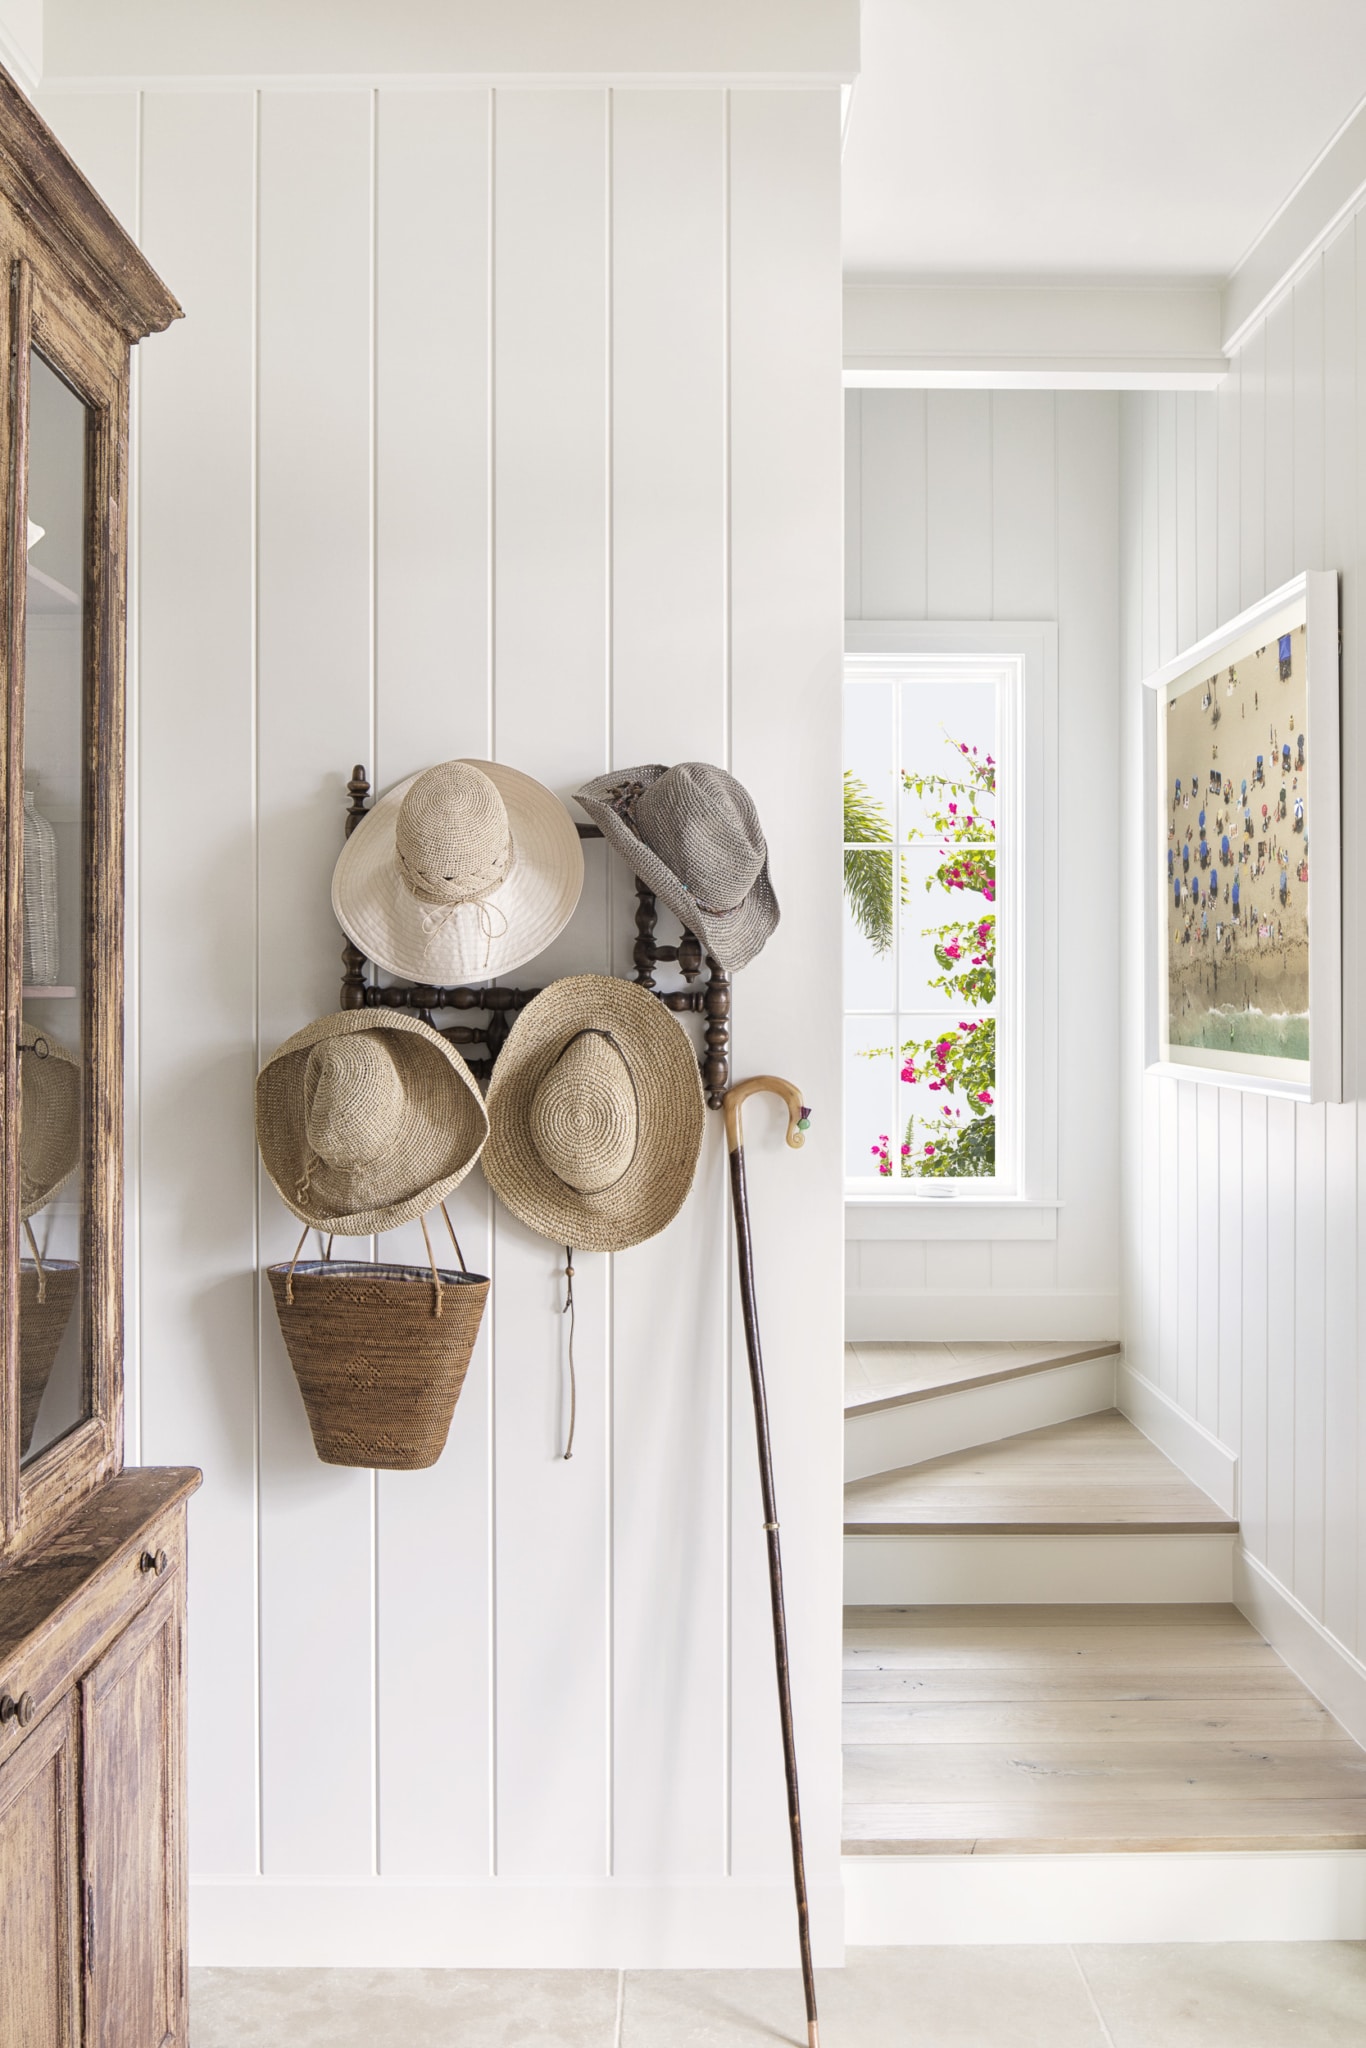 The architecture and design of Windsor a Vero Beach community - beachside - Jessica Glynn Photography - Hadley Keller Author - Vendome press - foyer with shiplap and hat rack